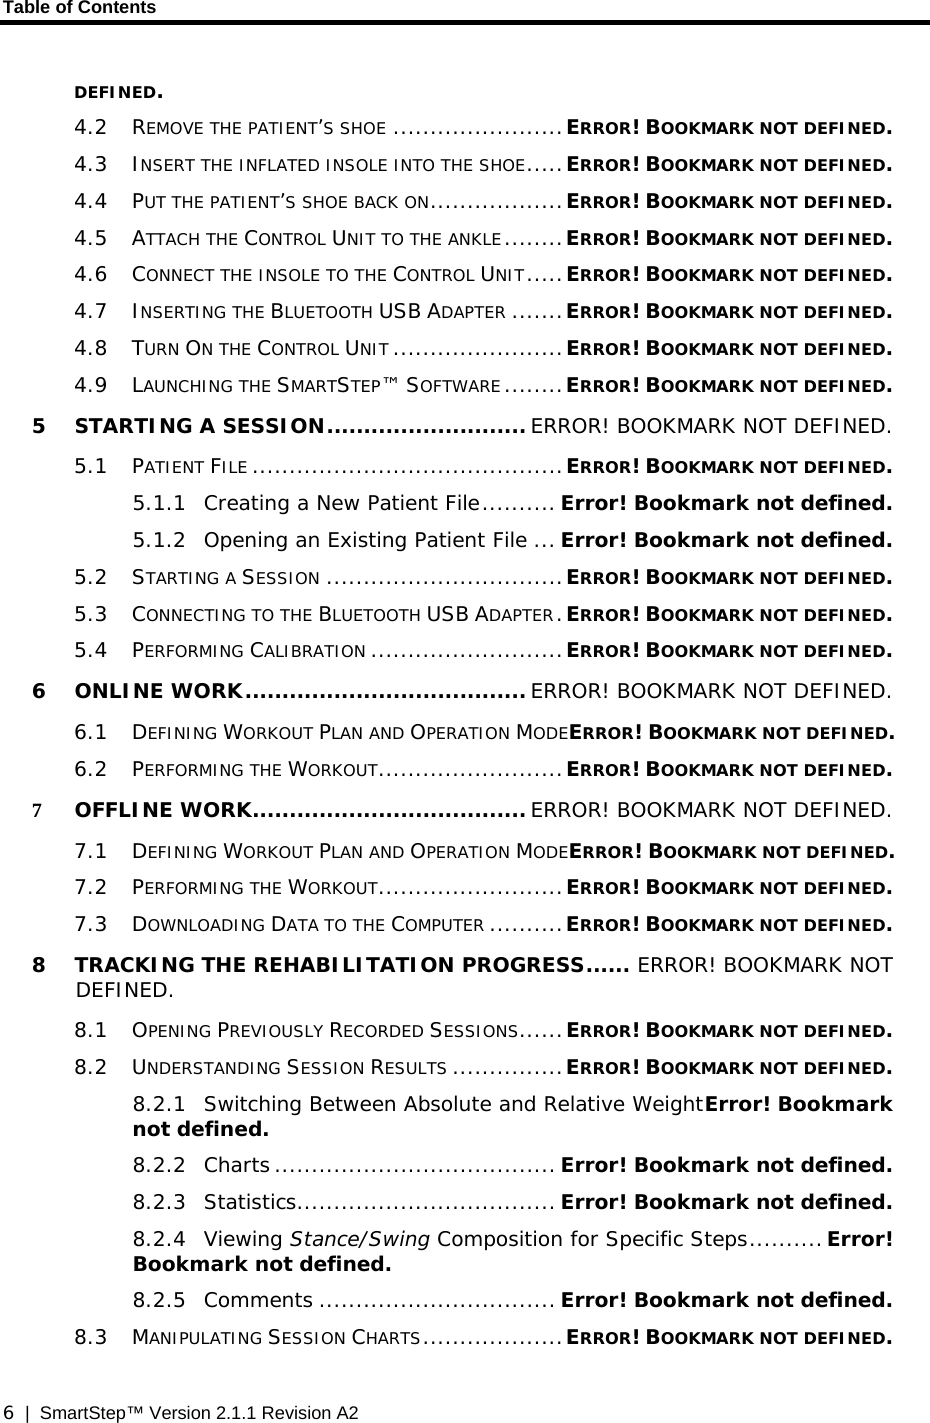 Table of Contents  6  |  SmartStep™ Version 2.1.1 Revision A2 DEFINED. 4.2 REMOVE THE PATIENT’S SHOE .......................ERROR! BOOKMARK NOT DEFINED. 4.3 INSERT THE INFLATED INSOLE INTO THE SHOE.....ERROR! BOOKMARK NOT DEFINED. 4.4 PUT THE PATIENT’S SHOE BACK ON..................ERROR! BOOKMARK NOT DEFINED. 4.5 ATTACH THE CONTROL UNIT TO THE ANKLE........ERROR! BOOKMARK NOT DEFINED. 4.6 CONNECT THE INSOLE TO THE CONTROL UNIT.....ERROR! BOOKMARK NOT DEFINED. 4.7 INSERTING THE BLUETOOTH USB ADAPTER .......ERROR! BOOKMARK NOT DEFINED. 4.8 TURN ON THE CONTROL UNIT .......................ERROR! BOOKMARK NOT DEFINED. 4.9 LAUNCHING THE SMARTSTEP™ SOFTWARE ........ERROR! BOOKMARK NOT DEFINED. 5 STARTING A SESSION........................... ERROR! BOOKMARK NOT DEFINED. 5.1 PATIENT FILE ..........................................ERROR! BOOKMARK NOT DEFINED. 5.1.1 Creating a New Patient File.......... Error! Bookmark not defined. 5.1.2 Opening an Existing Patient File ... Error! Bookmark not defined. 5.2 STARTING A SESSION ................................ERROR! BOOKMARK NOT DEFINED. 5.3 CONNECTING TO THE BLUETOOTH USB ADAPTER.ERROR! BOOKMARK NOT DEFINED. 5.4 PERFORMING CALIBRATION ..........................ERROR! BOOKMARK NOT DEFINED. 6 ONLINE WORK...................................... ERROR! BOOKMARK NOT DEFINED. 6.1 DEFINING WORKOUT PLAN AND OPERATION MODEERROR! BOOKMARK NOT DEFINED. 6.2 PERFORMING THE WORKOUT.........................ERROR! BOOKMARK NOT DEFINED. 7 OFFLINE WORK..................................... ERROR! BOOKMARK NOT DEFINED. 7.1 DEFINING WORKOUT PLAN AND OPERATION MODEERROR! BOOKMARK NOT DEFINED. 7.2 PERFORMING THE WORKOUT.........................ERROR! BOOKMARK NOT DEFINED. 7.3 DOWNLOADING DATA TO THE COMPUTER ..........ERROR! BOOKMARK NOT DEFINED. 8 TRACKING THE REHABILITATION PROGRESS...... ERROR! BOOKMARK NOT DEFINED. 8.1 OPENING PREVIOUSLY RECORDED SESSIONS......ERROR! BOOKMARK NOT DEFINED. 8.2 UNDERSTANDING SESSION RESULTS ...............ERROR! BOOKMARK NOT DEFINED. 8.2.1 Switching Between Absolute and Relative WeightError! Bookmark not defined. 8.2.2 Charts ...................................... Error! Bookmark not defined. 8.2.3 Statistics................................... Error! Bookmark not defined. 8.2.4 Viewing Stance/Swing Composition for Specific Steps..........Error! Bookmark not defined. 8.2.5 Comments ................................ Error! Bookmark not defined. 8.3 MANIPULATING SESSION CHARTS...................ERROR! BOOKMARK NOT DEFINED. 